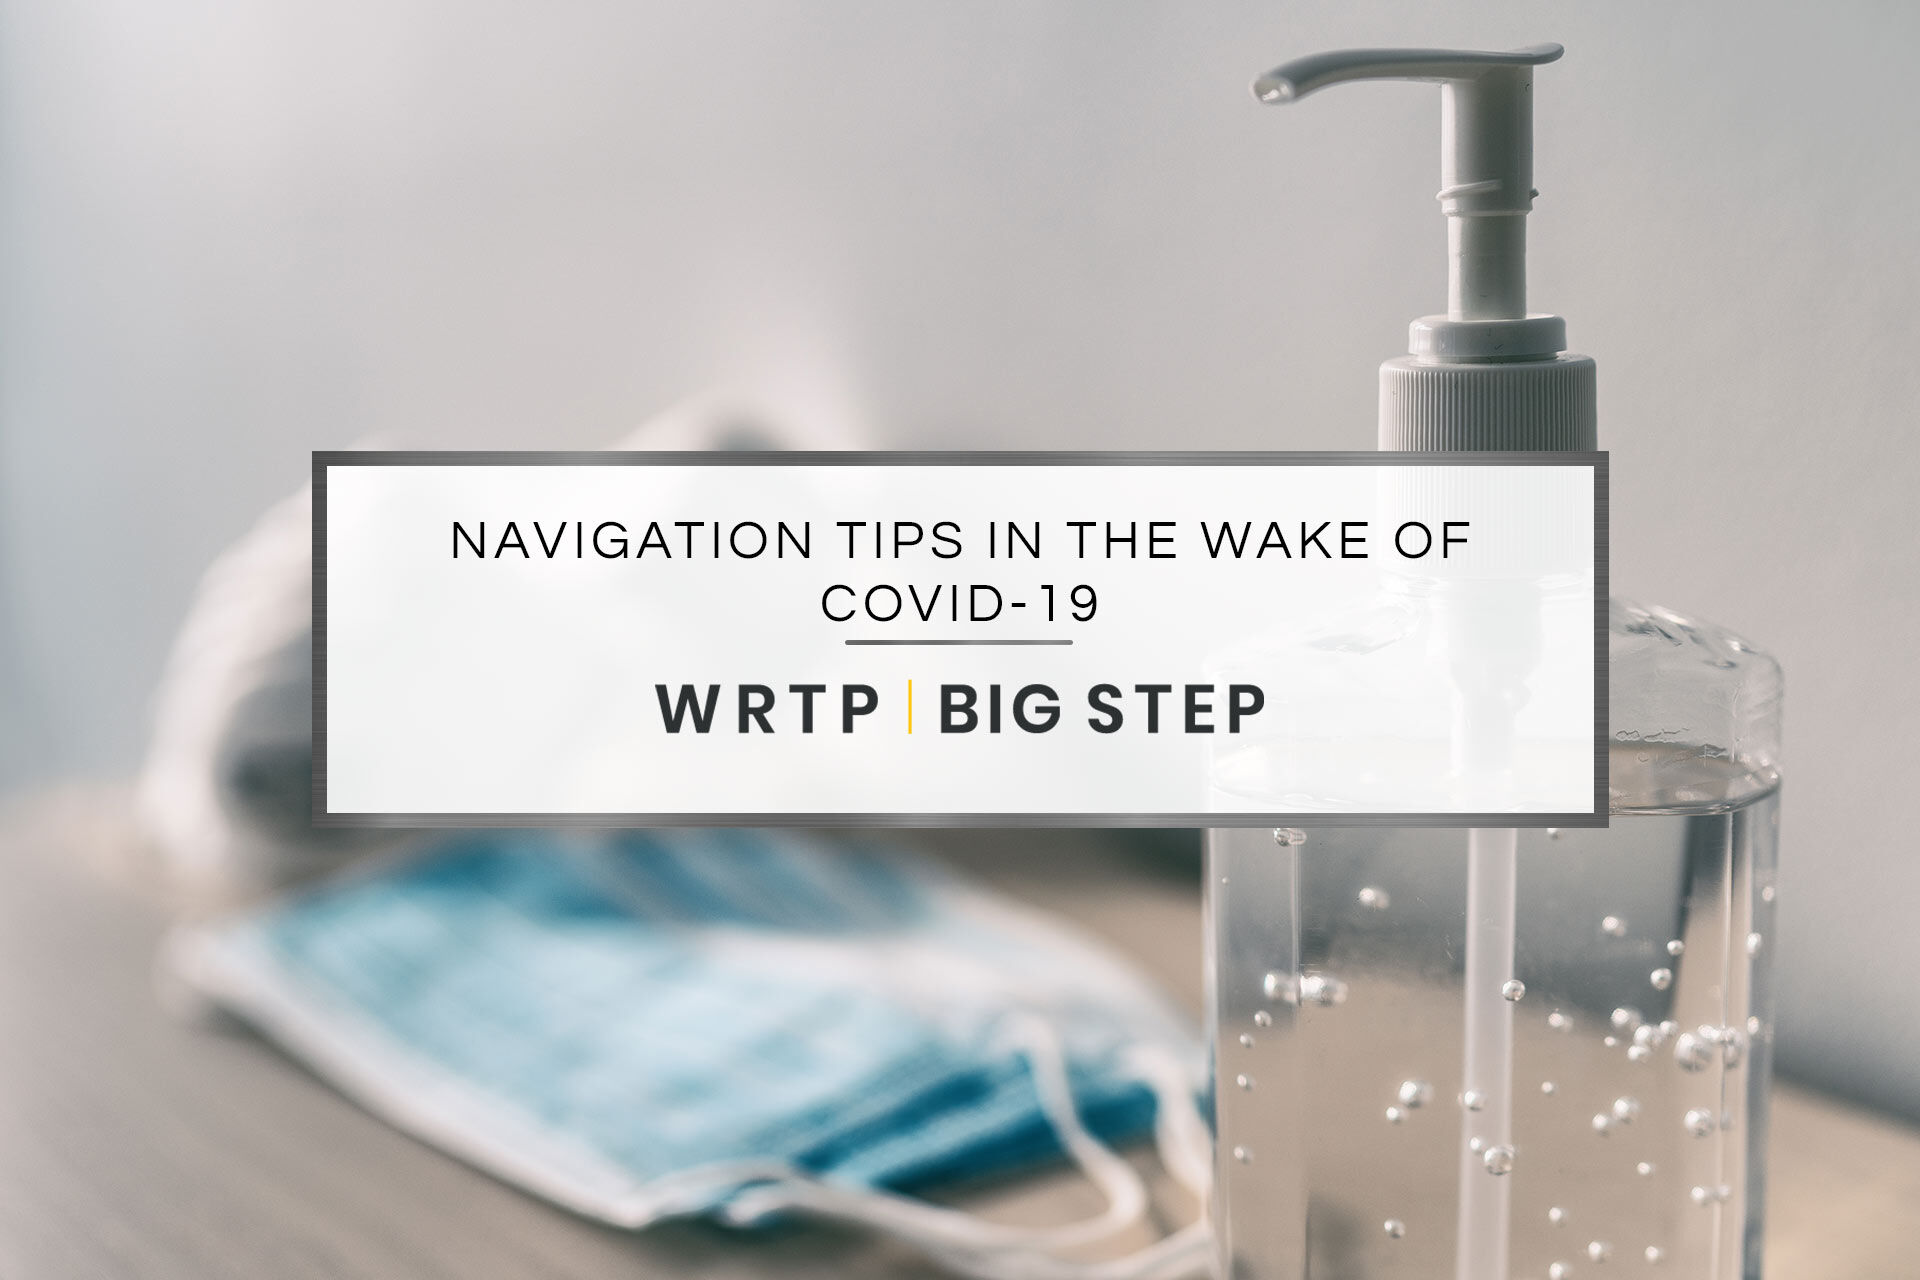 Navigation Tips in the Wake of COVID-19